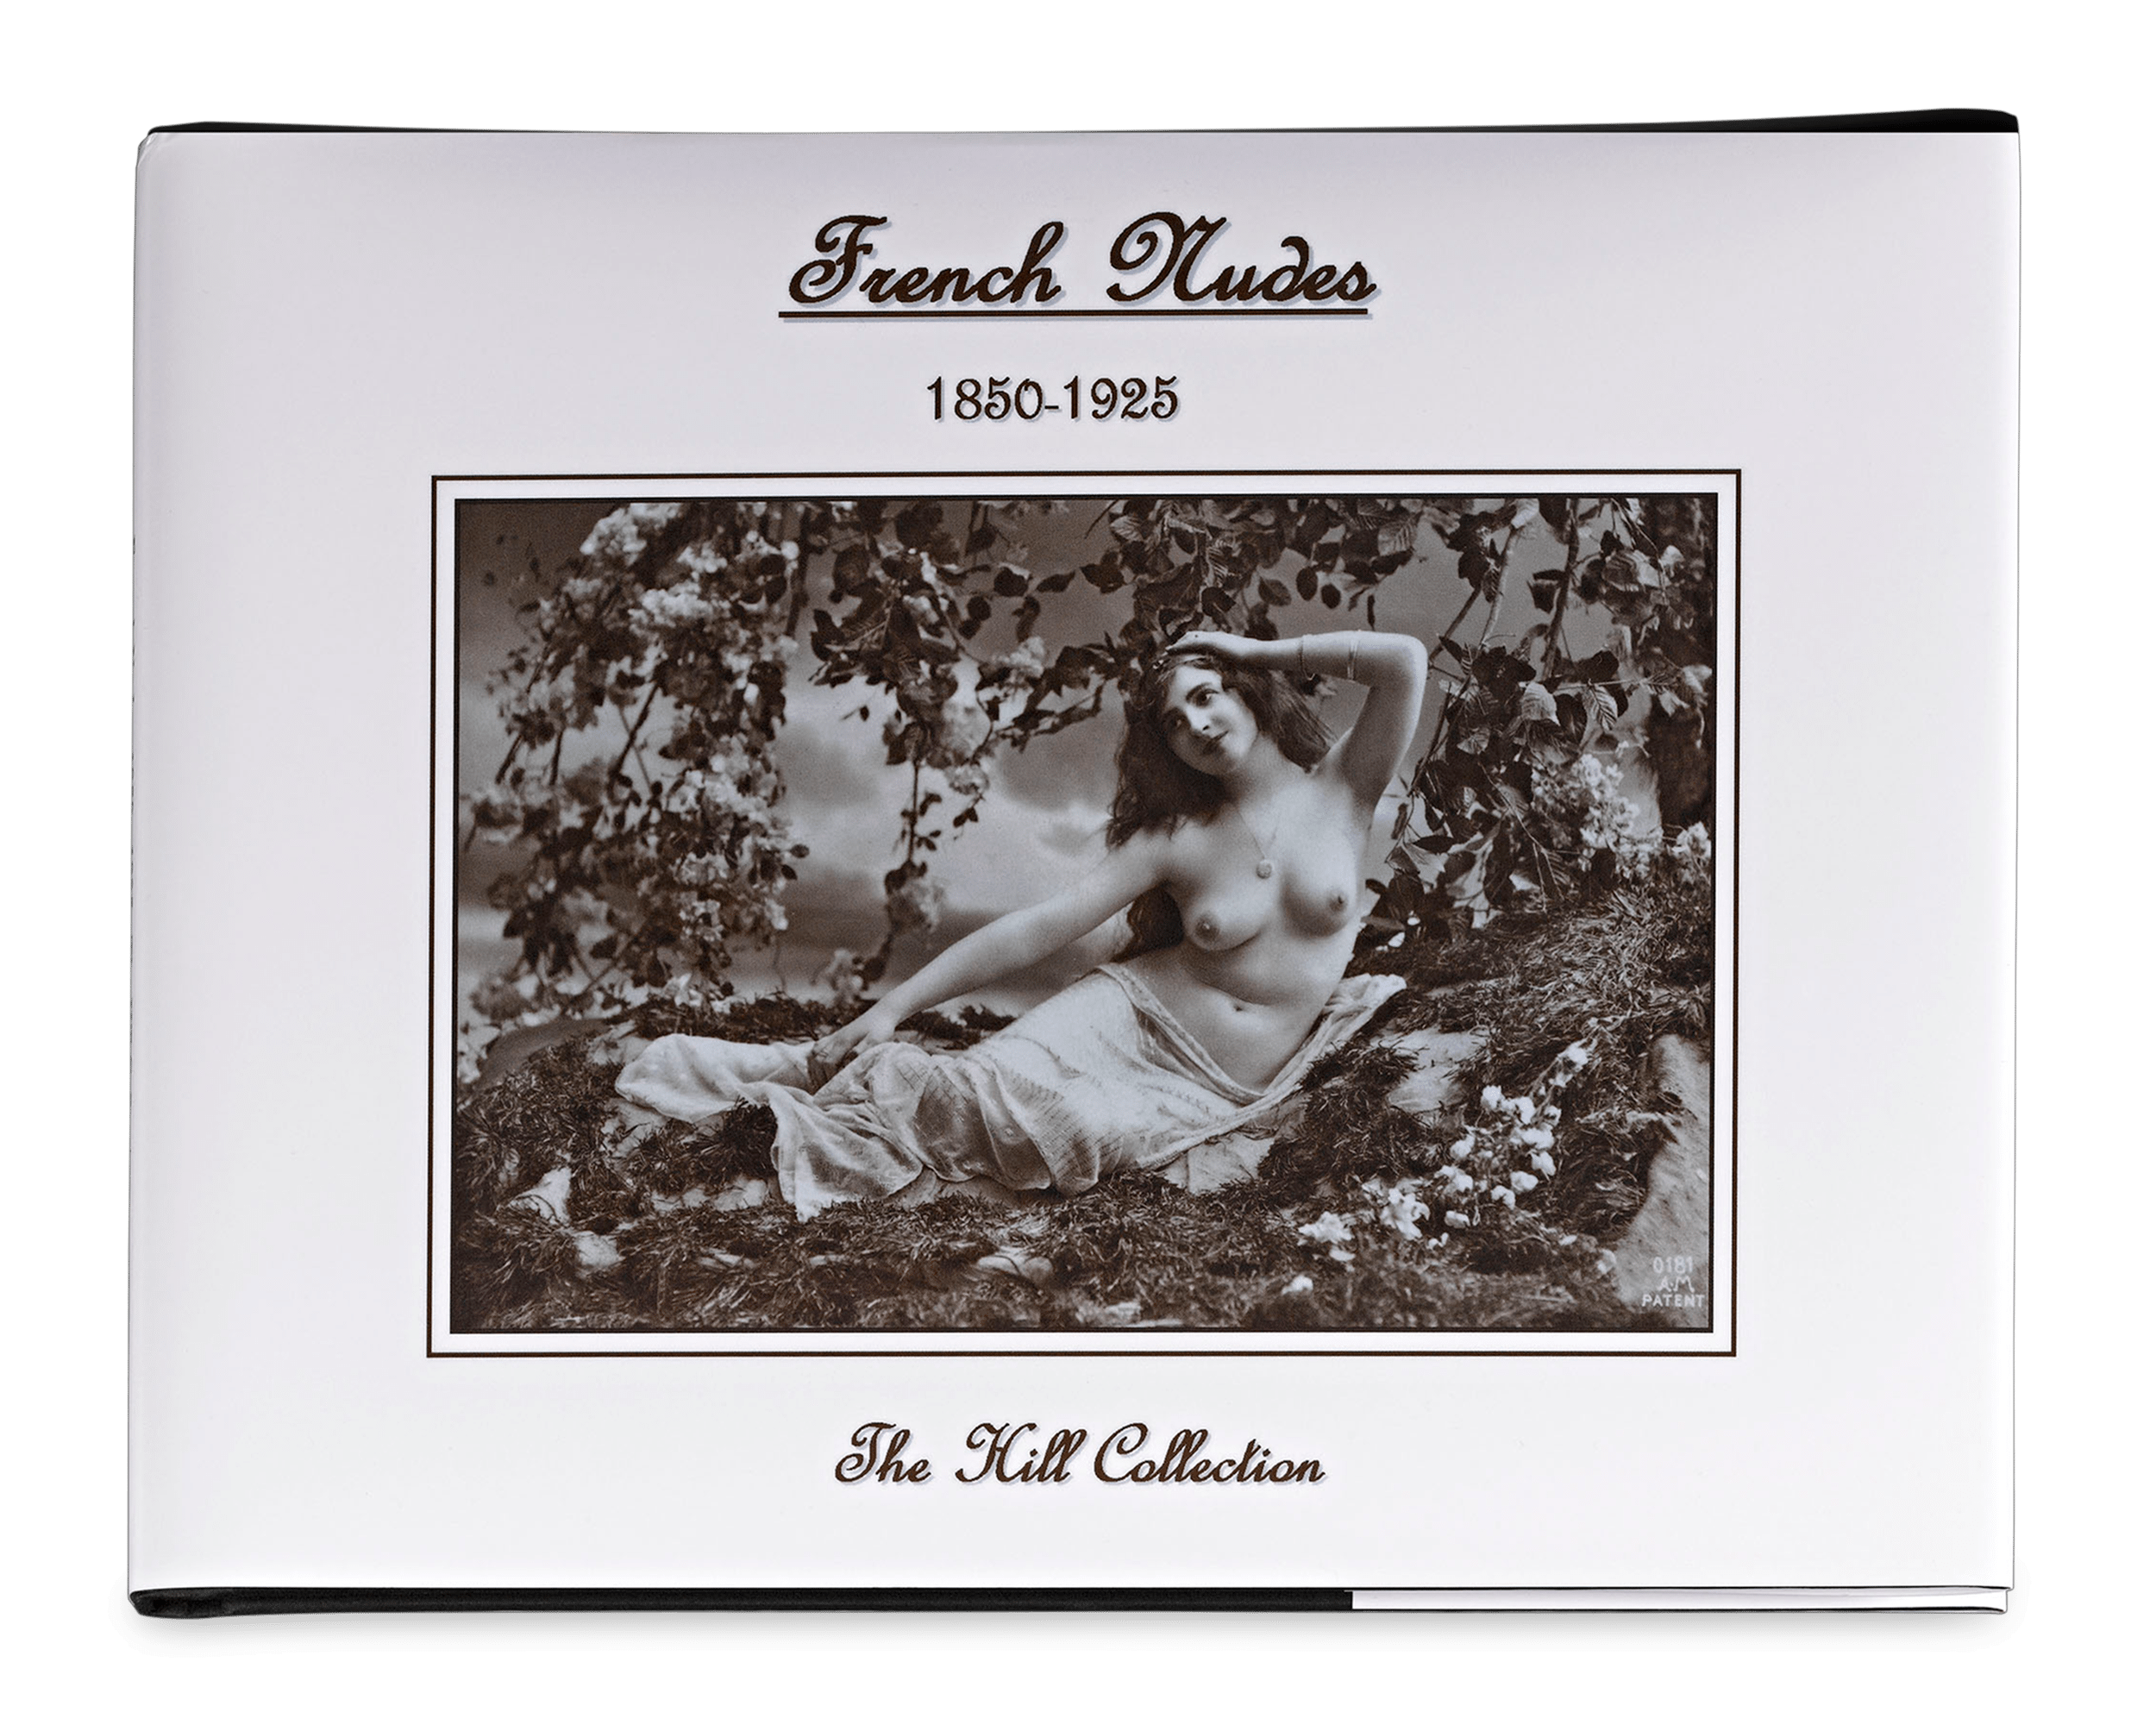 A limited edition book written about the collection, French Nudes: 1850-1925, is included